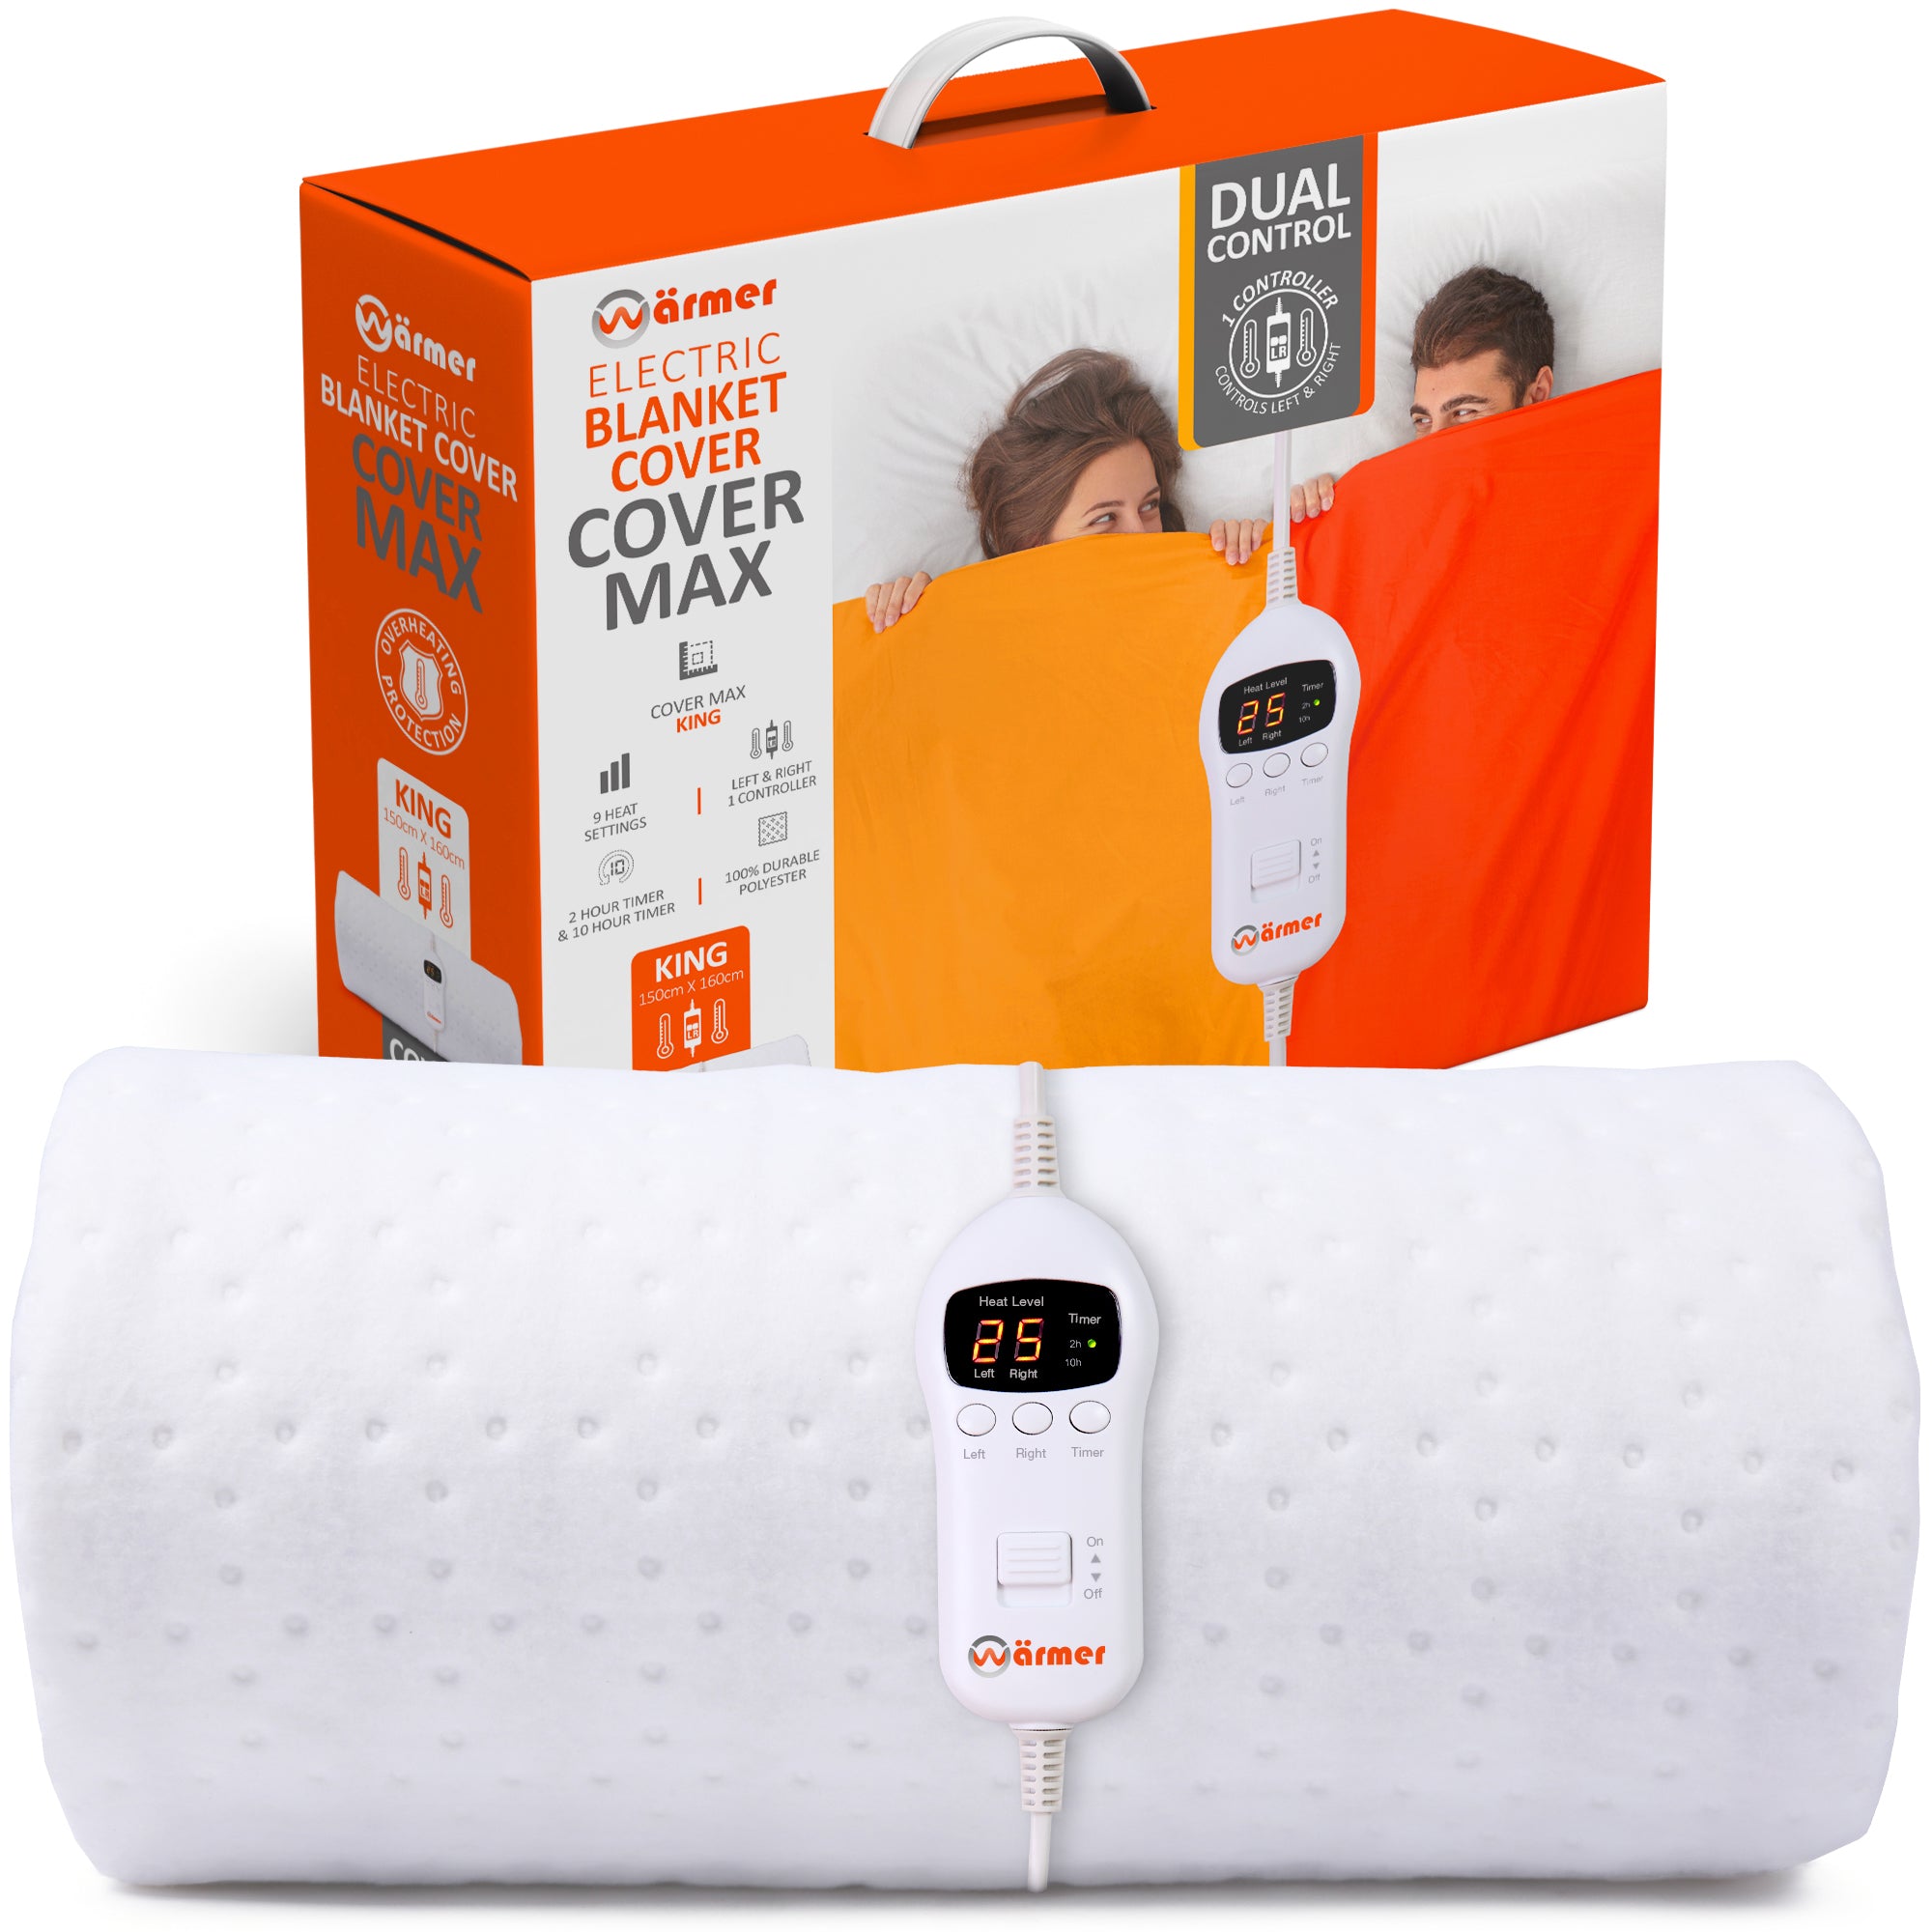 Wärmer 'Cover Max' Electric Blanket - Maximum Coverage, Left & Right Dual Heating Zones, 9 Heat Settings & Timer